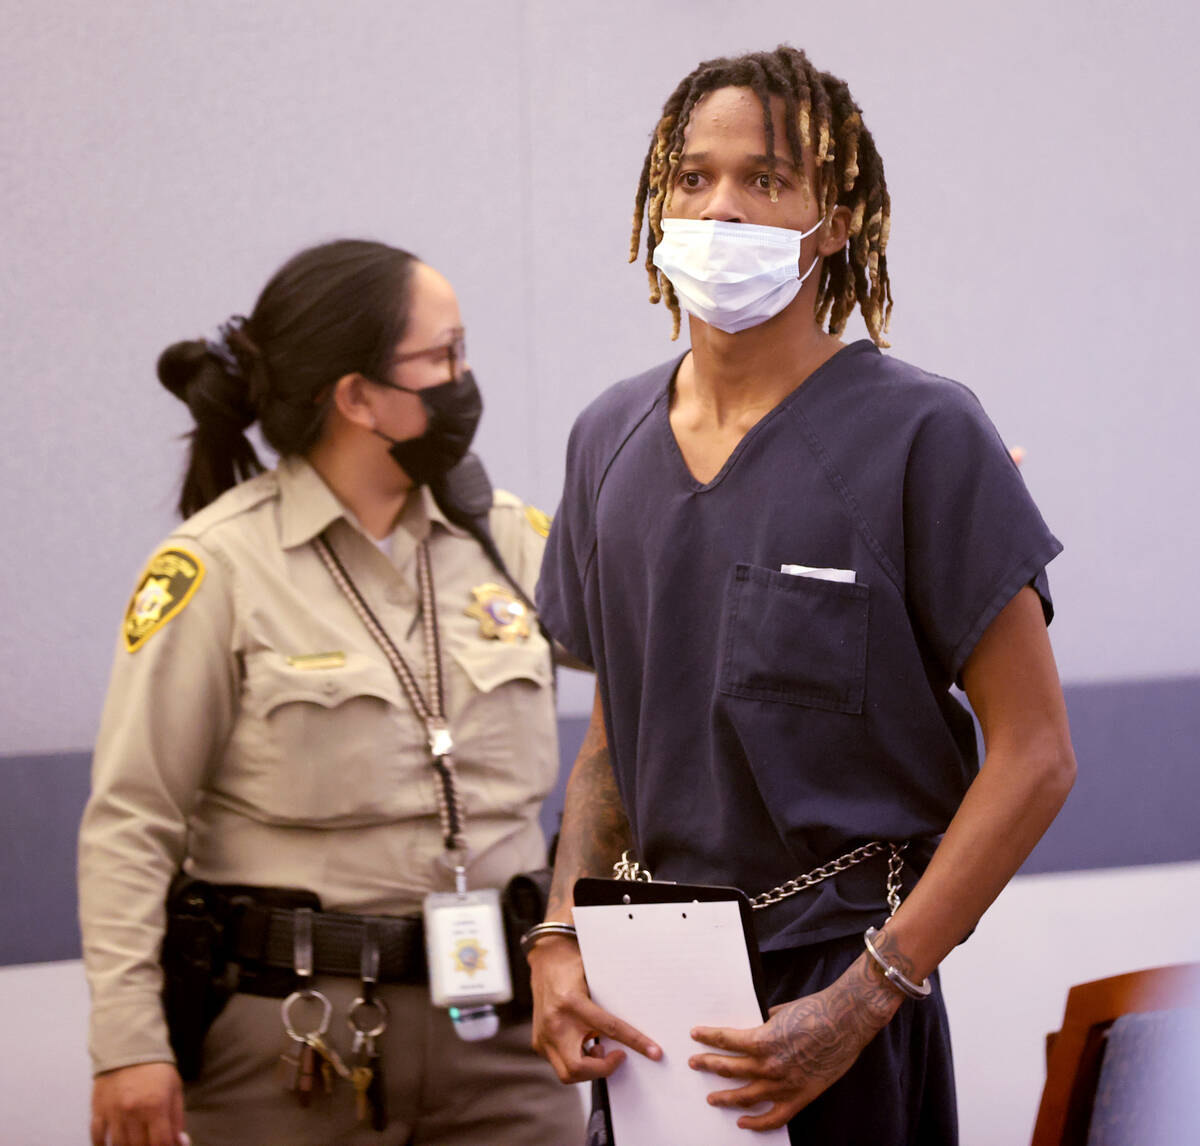 Jesani Carter, 20, appears in court at the Regional Justice Center in downtown Las Vegas Tuesda ...